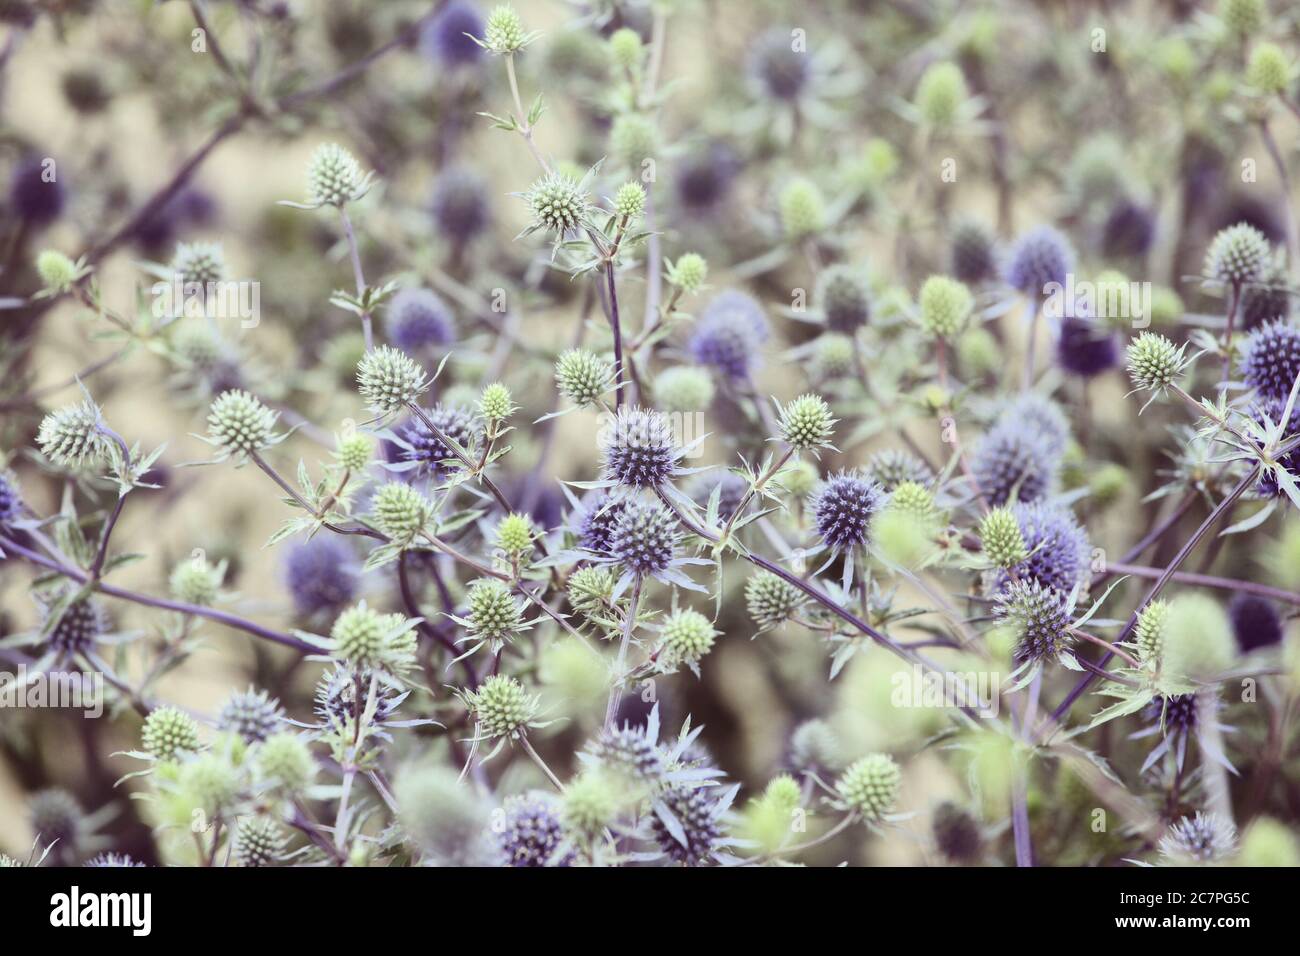 Mediterranean sea holly (Eryngium bourgatii ) blooming in the sunlight Stock Photo